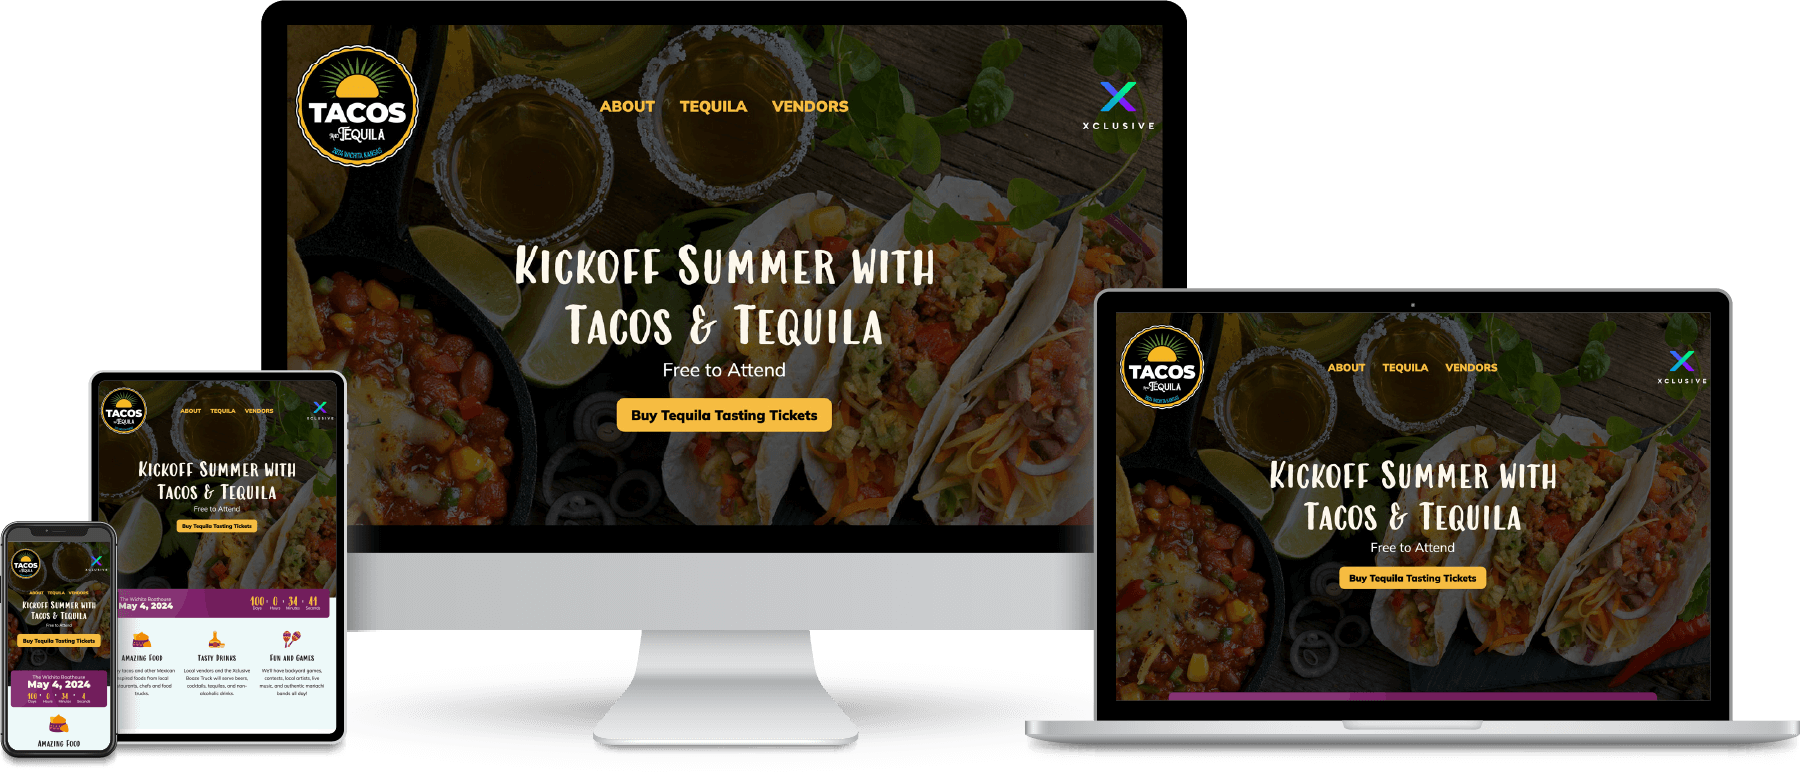 Tacos and Tequila website shown on desktop, laptop, tablet and mobile devices.